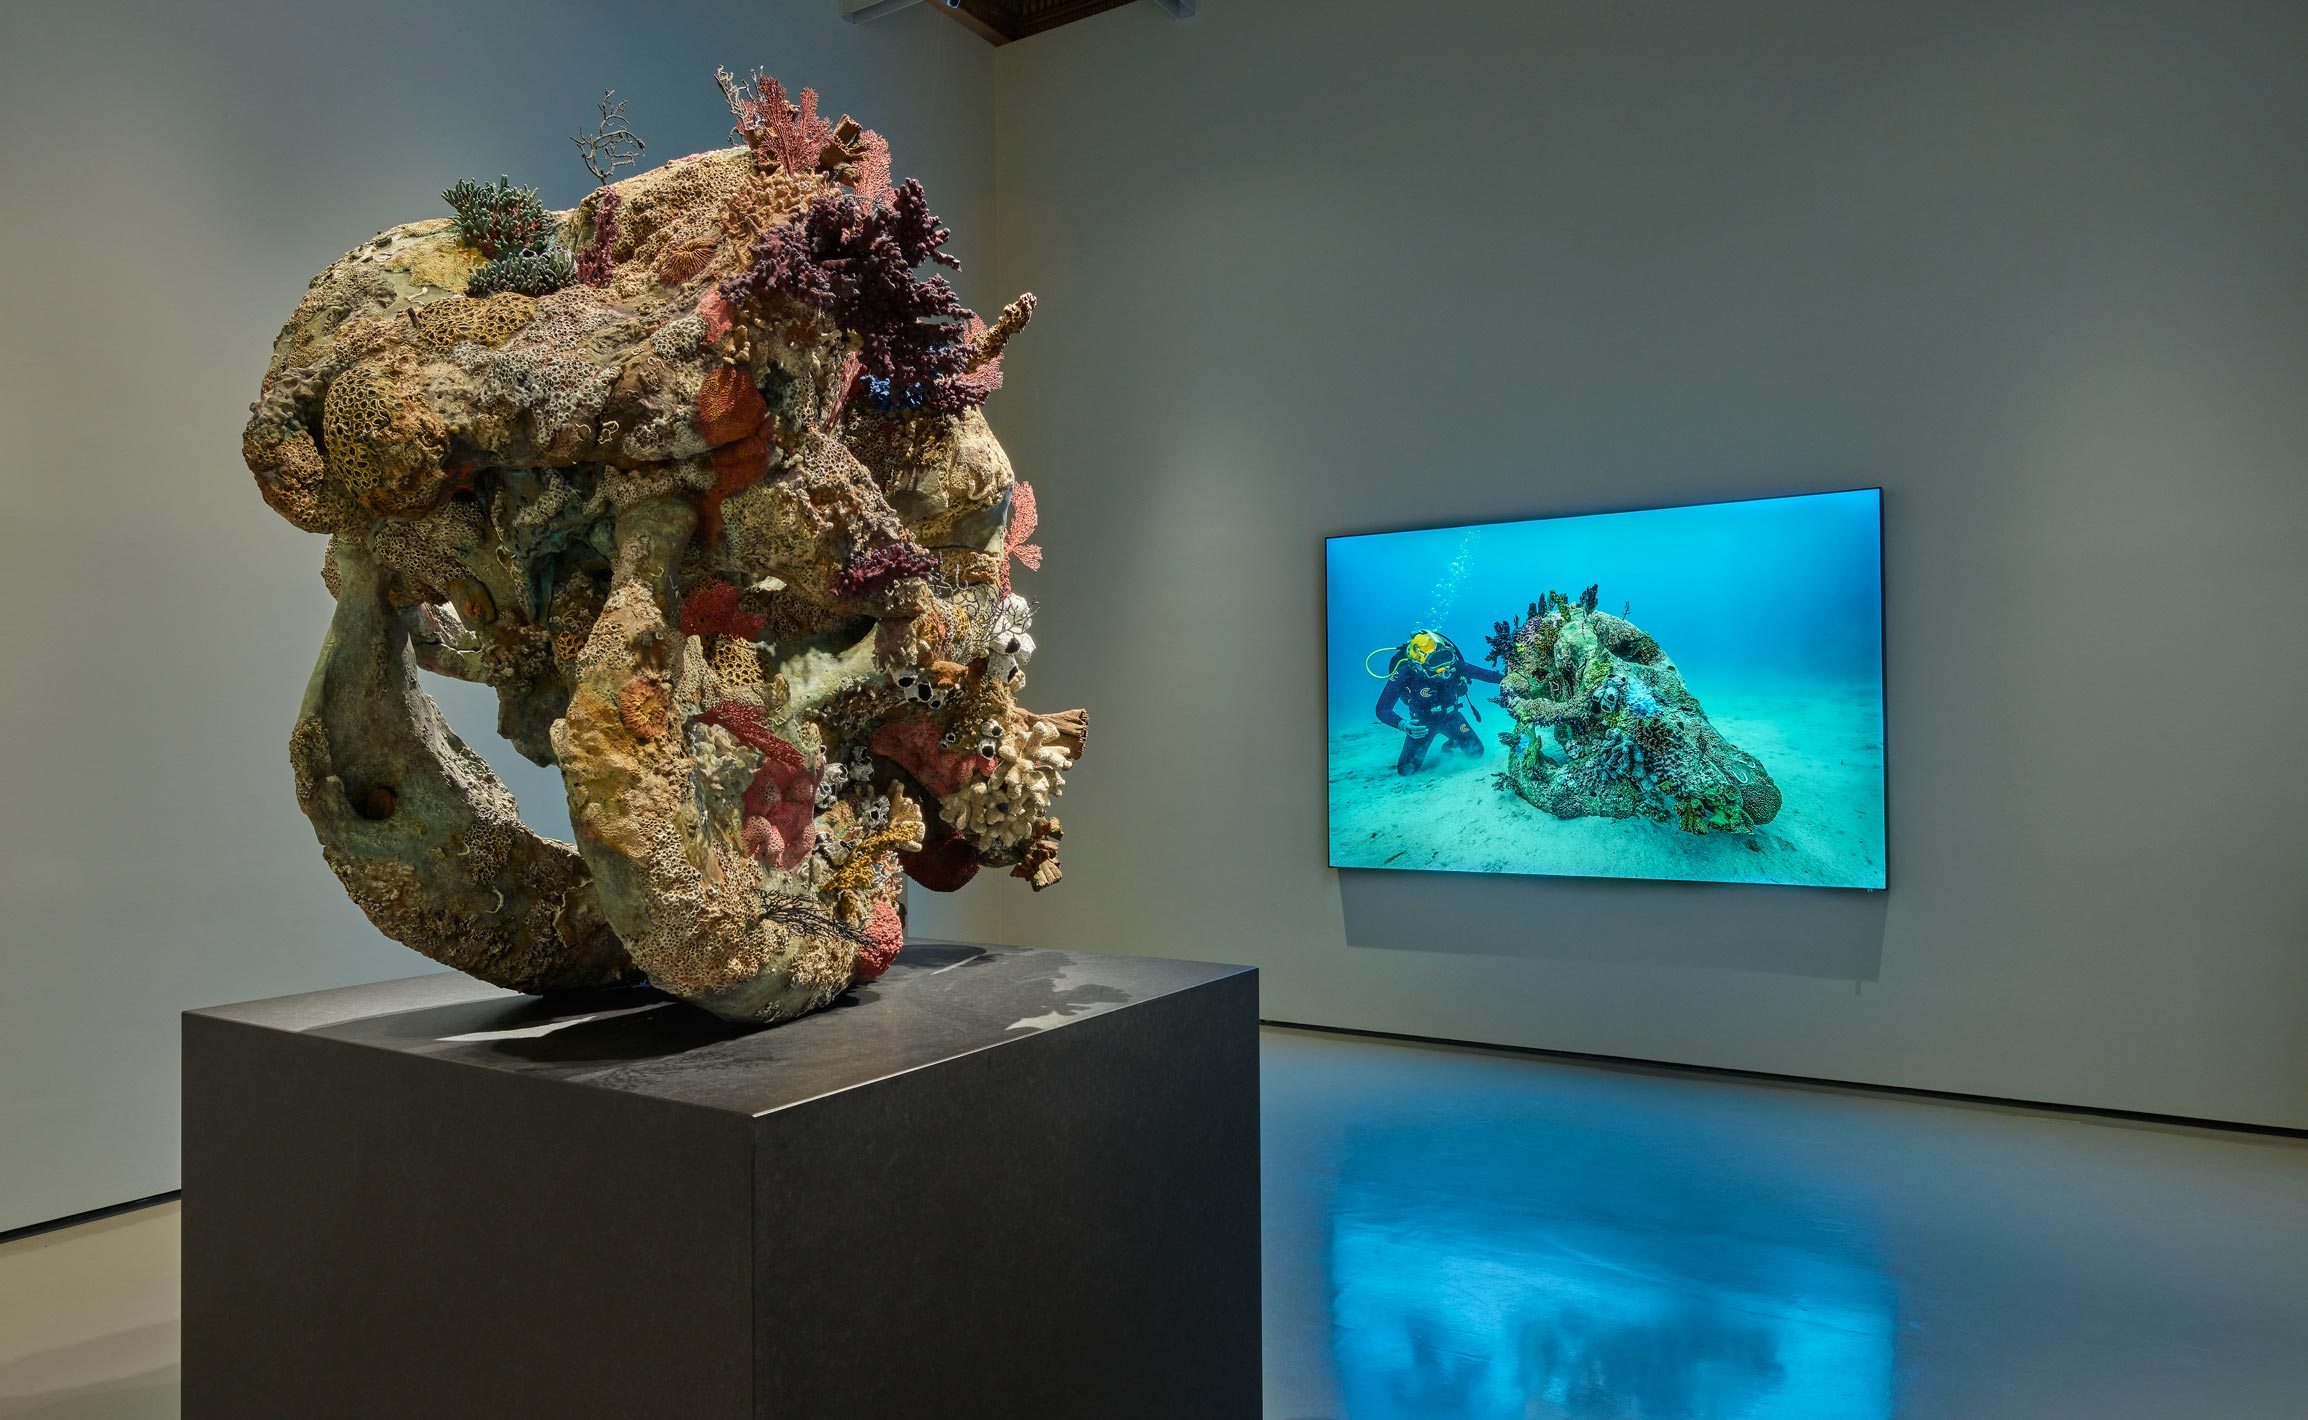 Room 5:
(left to right)
Damien Hirst, Skull of a Cyclops, Skull of a Cyclops Examined by a Diver (photography
Christoph Gerigk). Photographed by Prudence Cuming Associates © Damien Hirst and Science Ltd.
All rights reserved, DACS/SIAE 2017